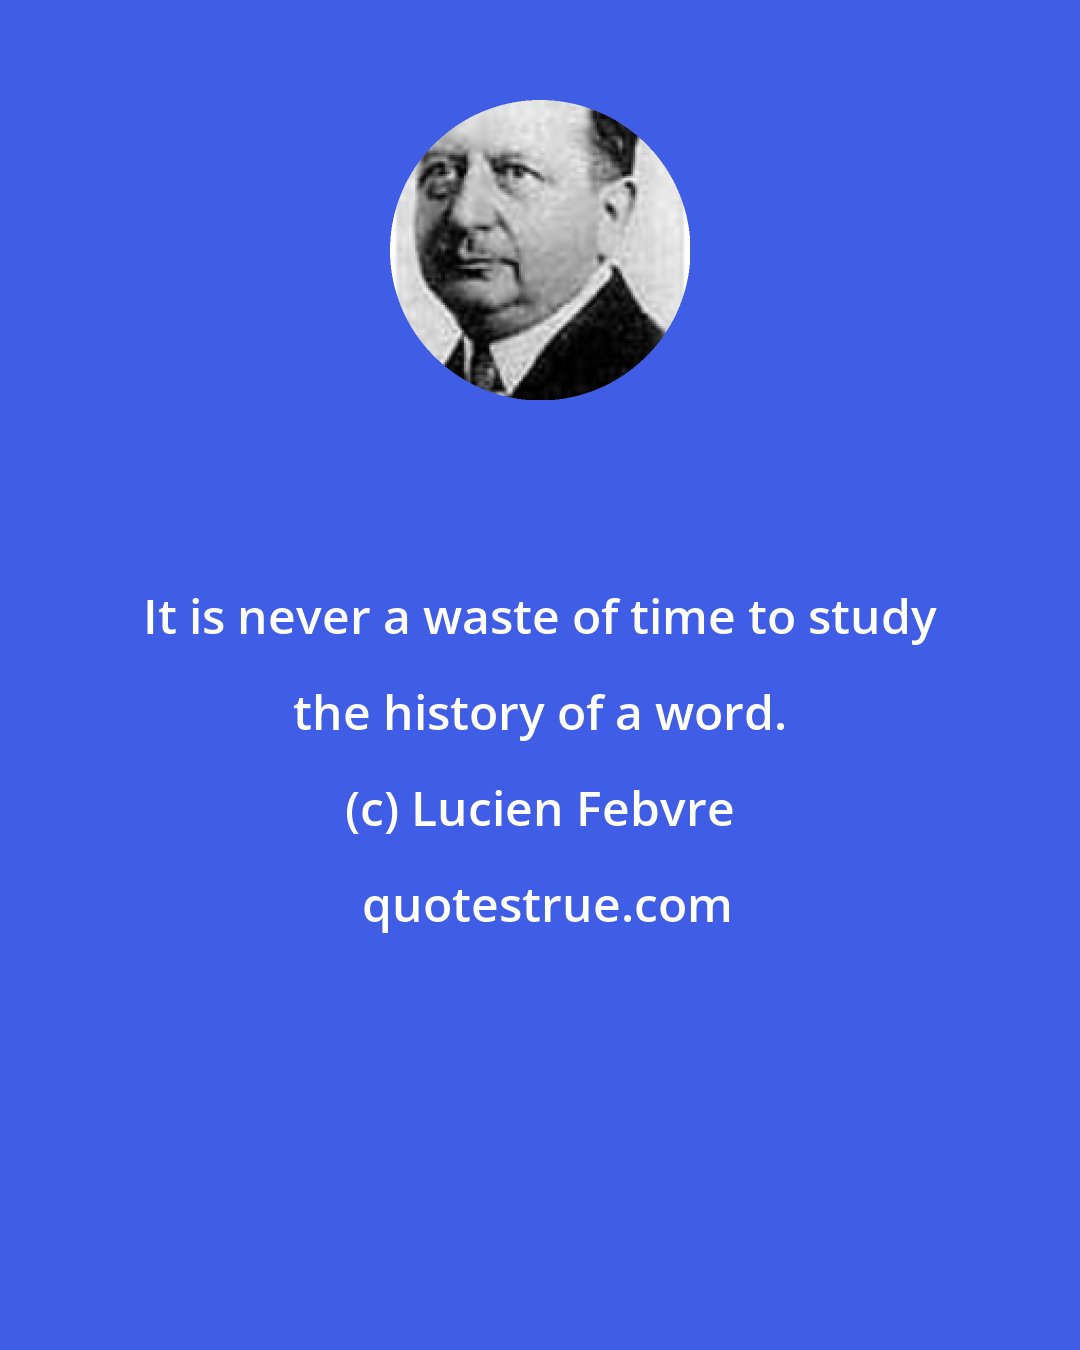 Lucien Febvre: It is never a waste of time to study the history of a word.